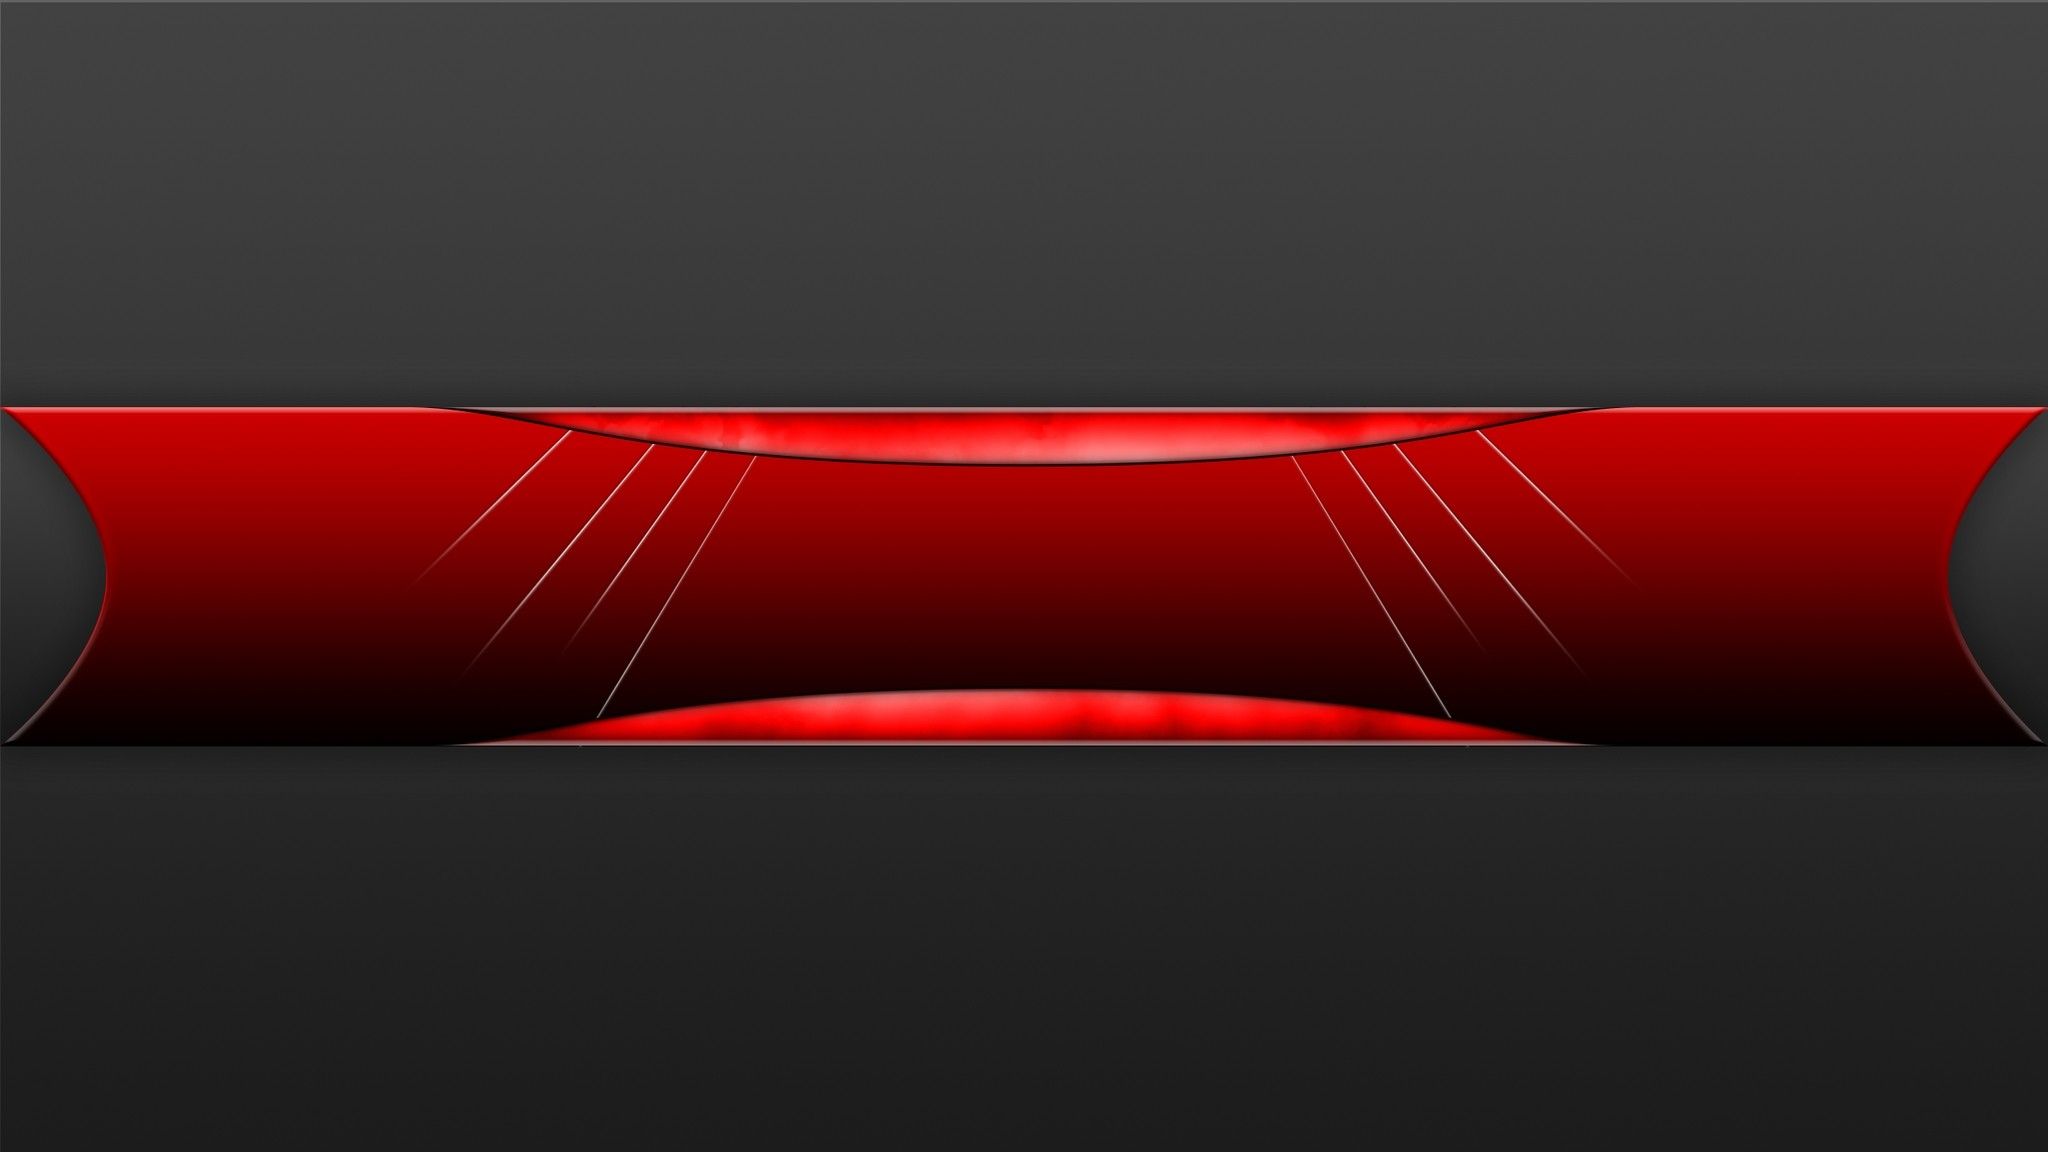 Free Youtube Banner Designs throughout Banner For Youtube 3991. Youtube banner , Youtube banner background, Youtube banners